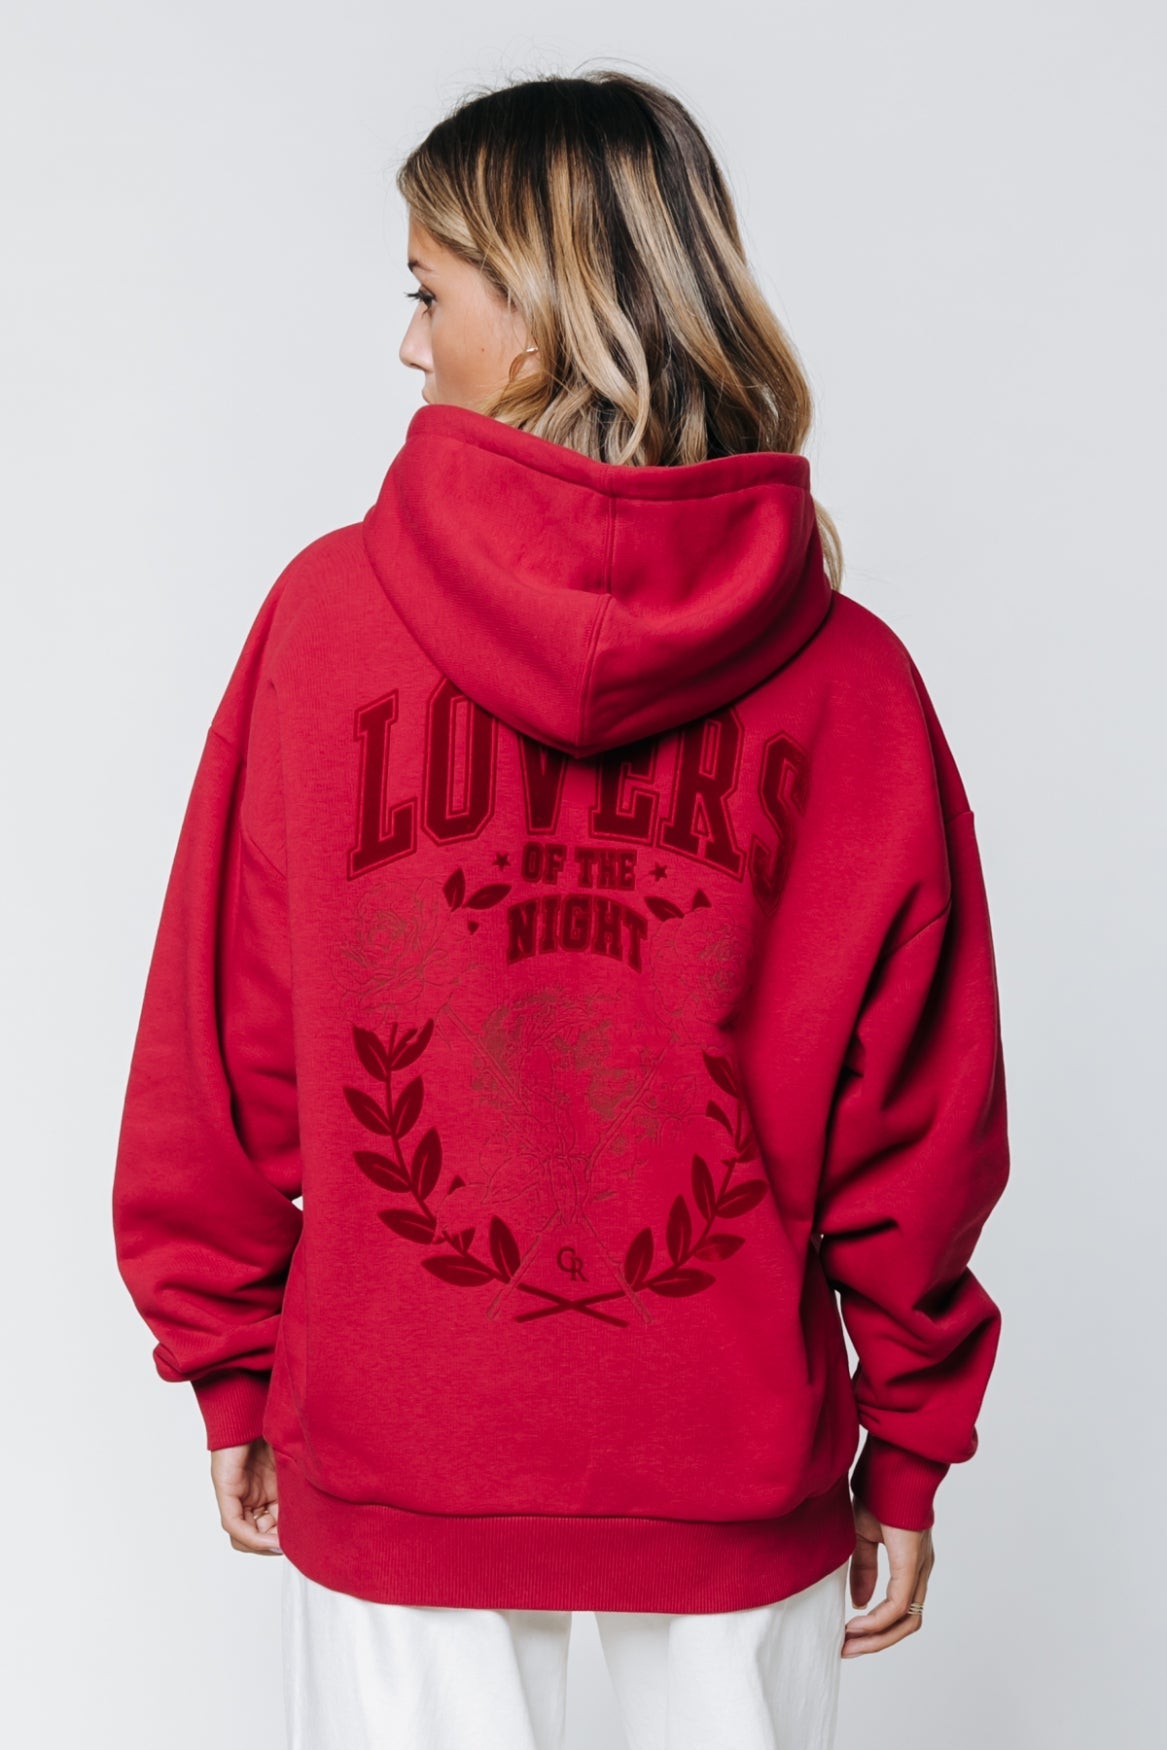 Colourful Rebel Lovers Of The Night Oversized Hoodie | Dark red 8720603246248